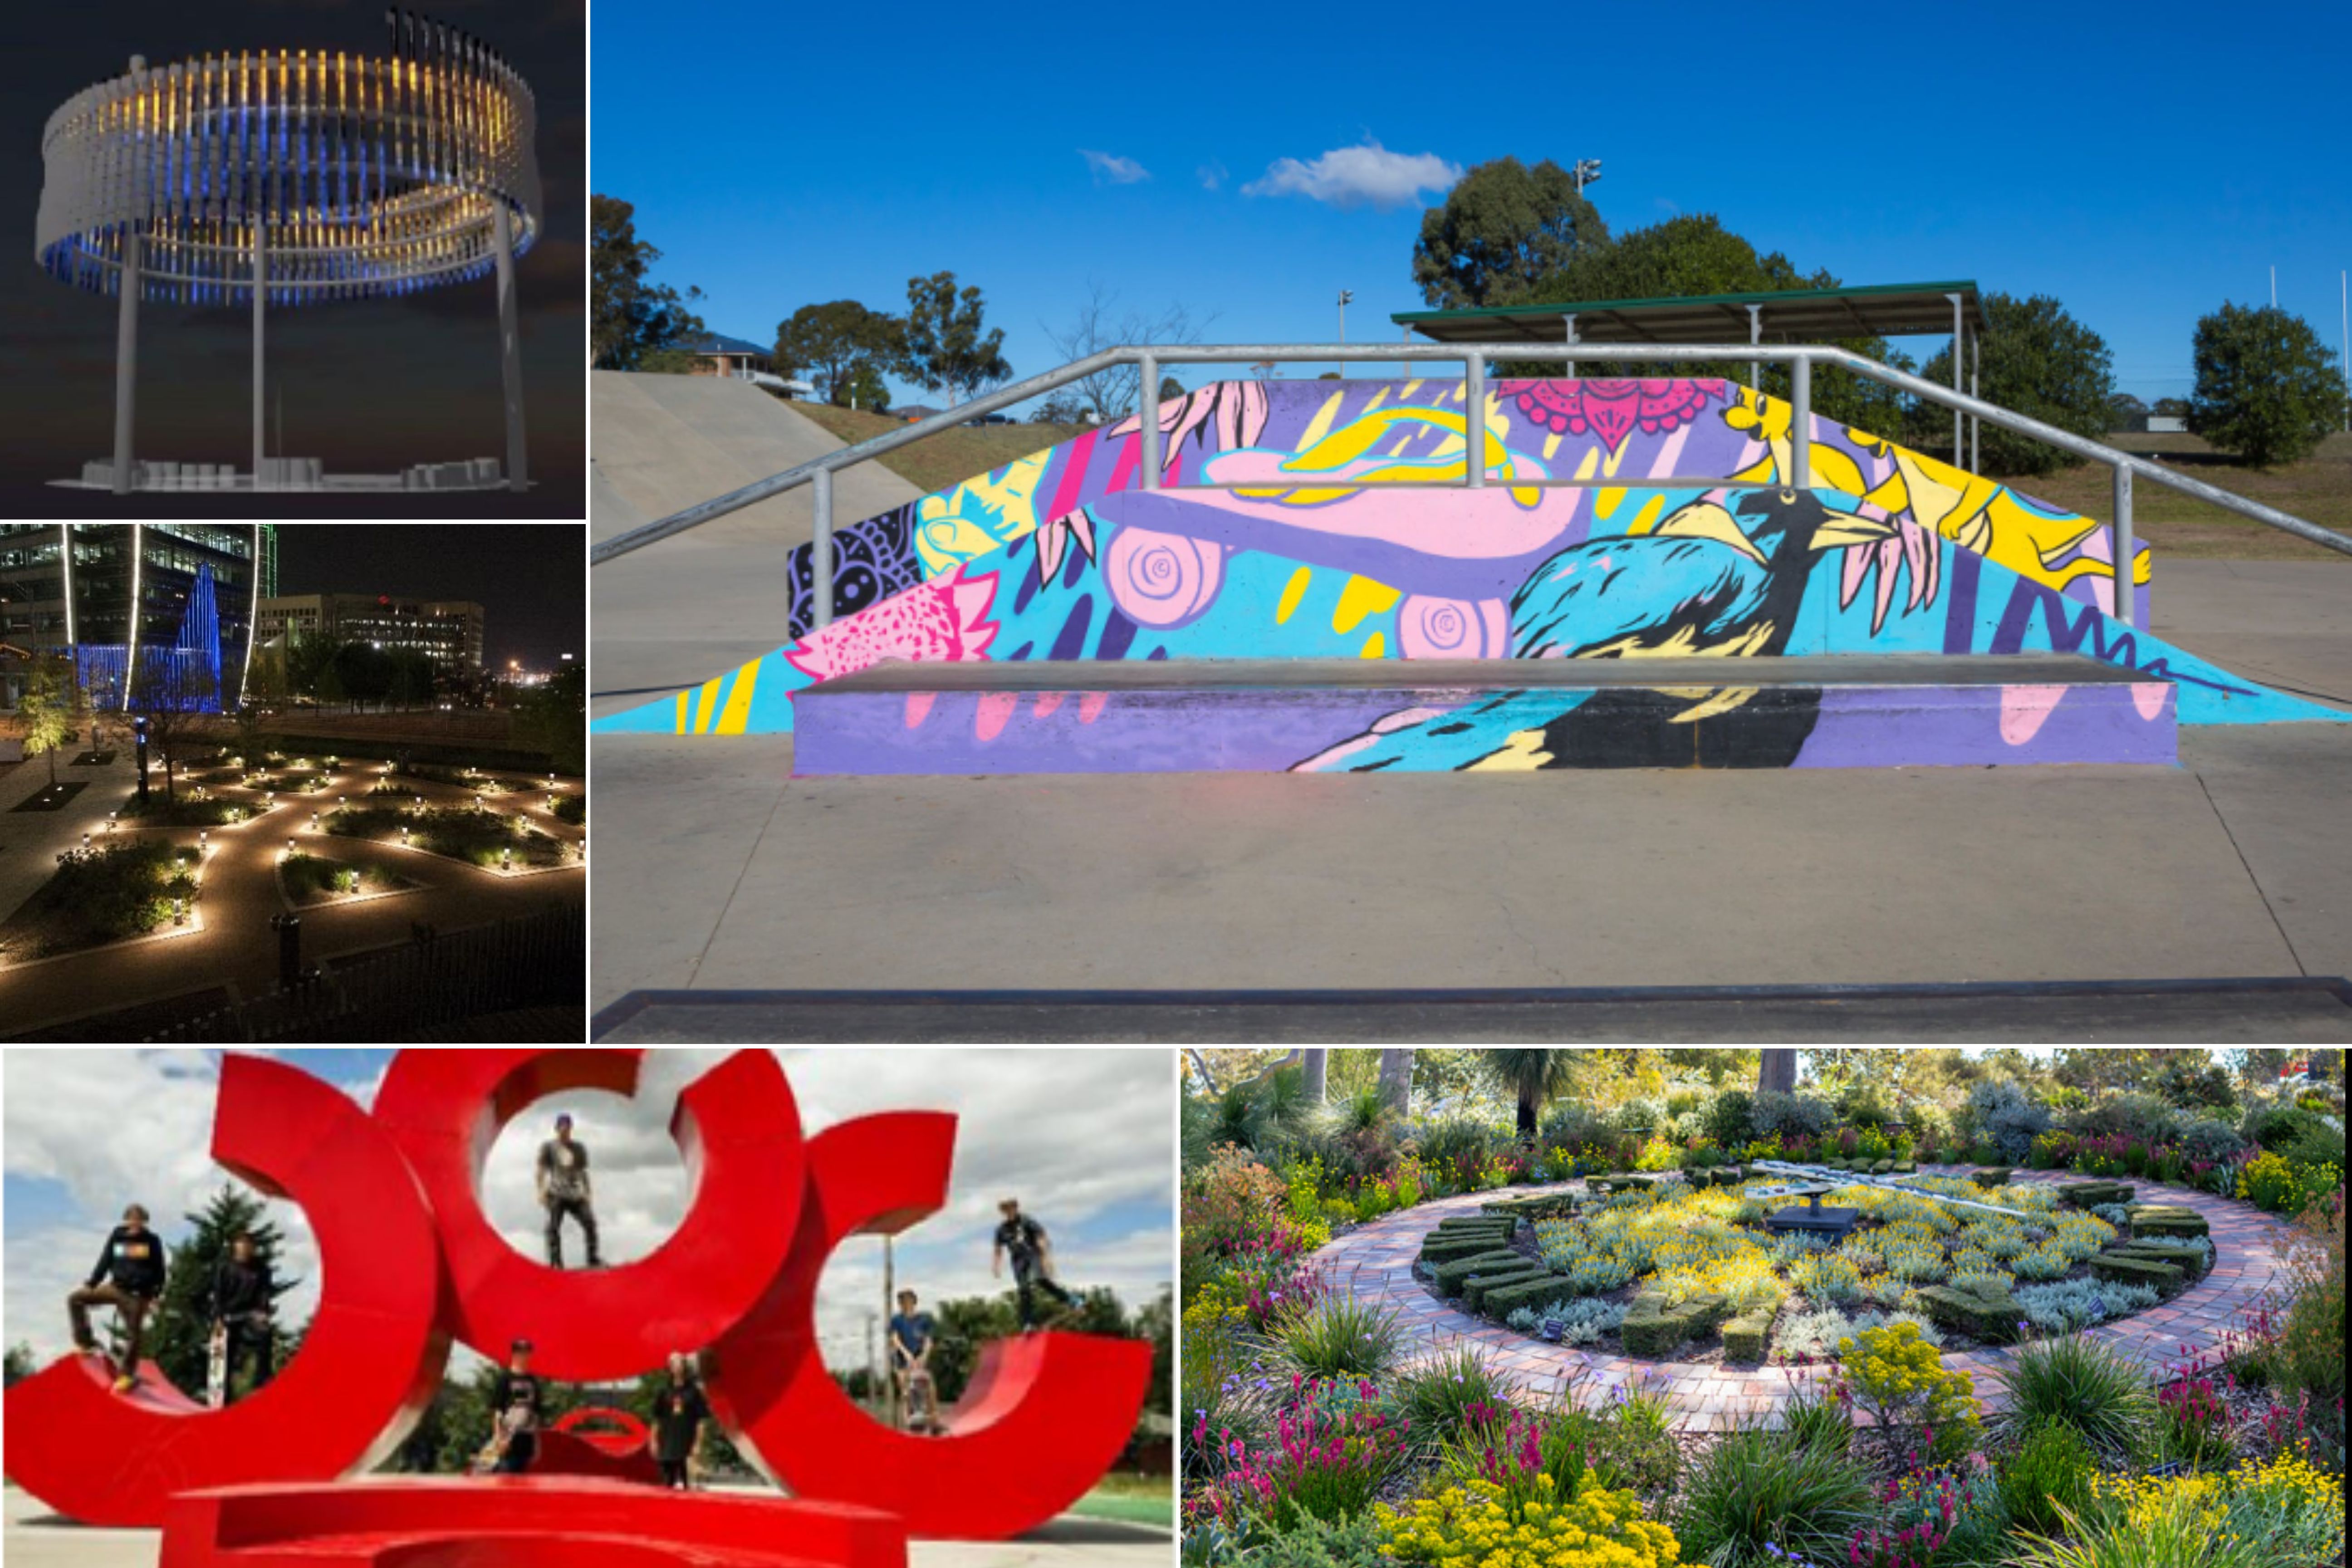 Have your say on new skate park art